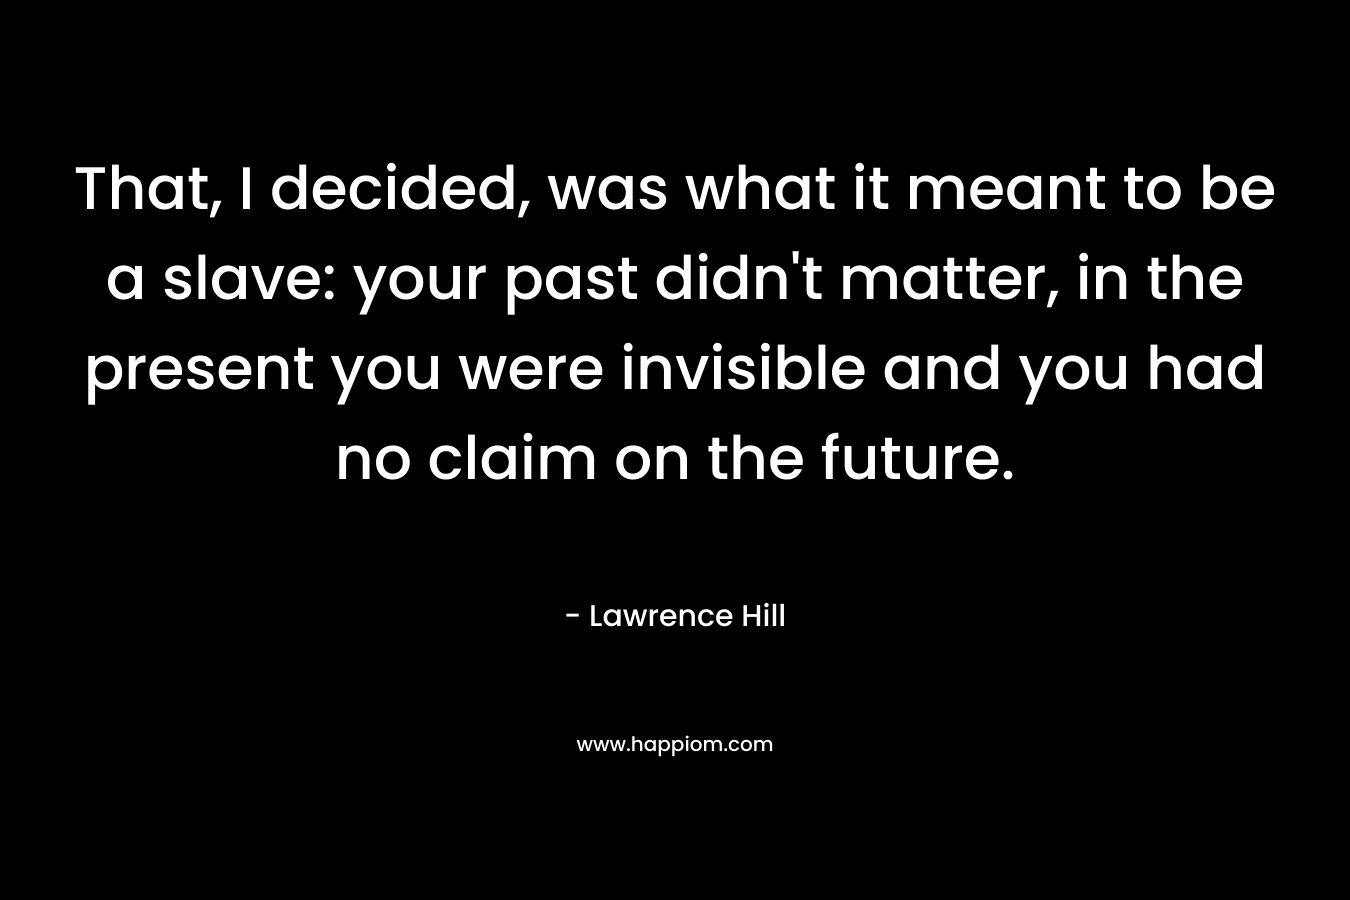 That, I decided, was what it meant to be a slave: your past didn’t matter, in the present you were invisible and you had no claim on the future. – Lawrence Hill